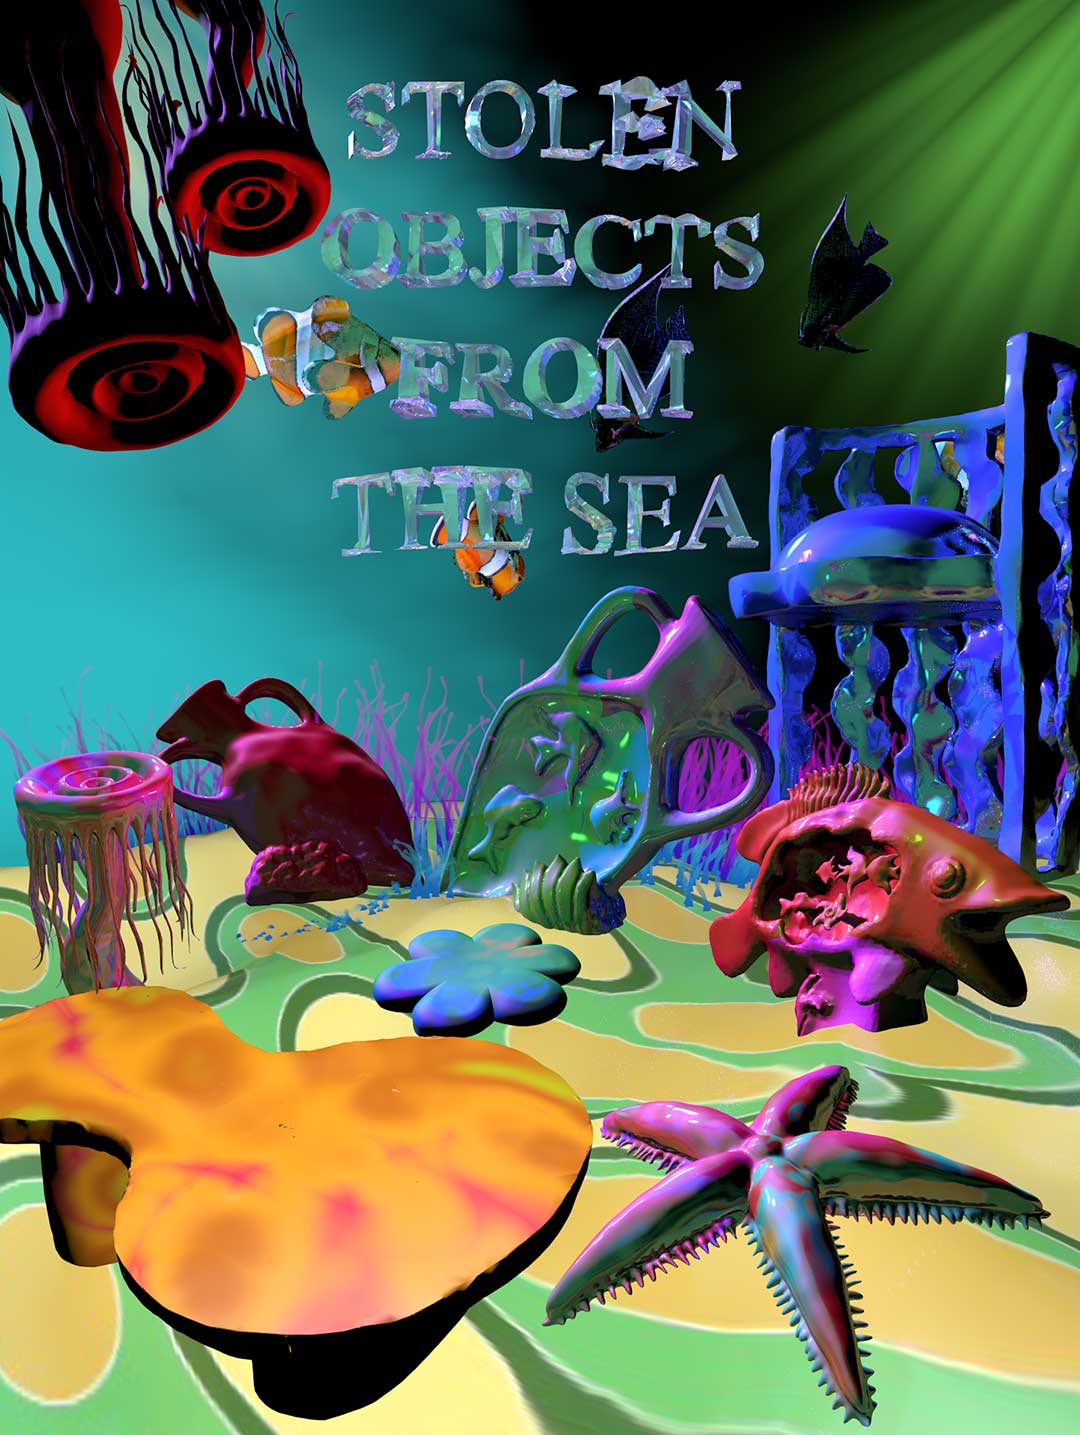 Stolen objects from under the sea, by Uchronia and Antoine Billore